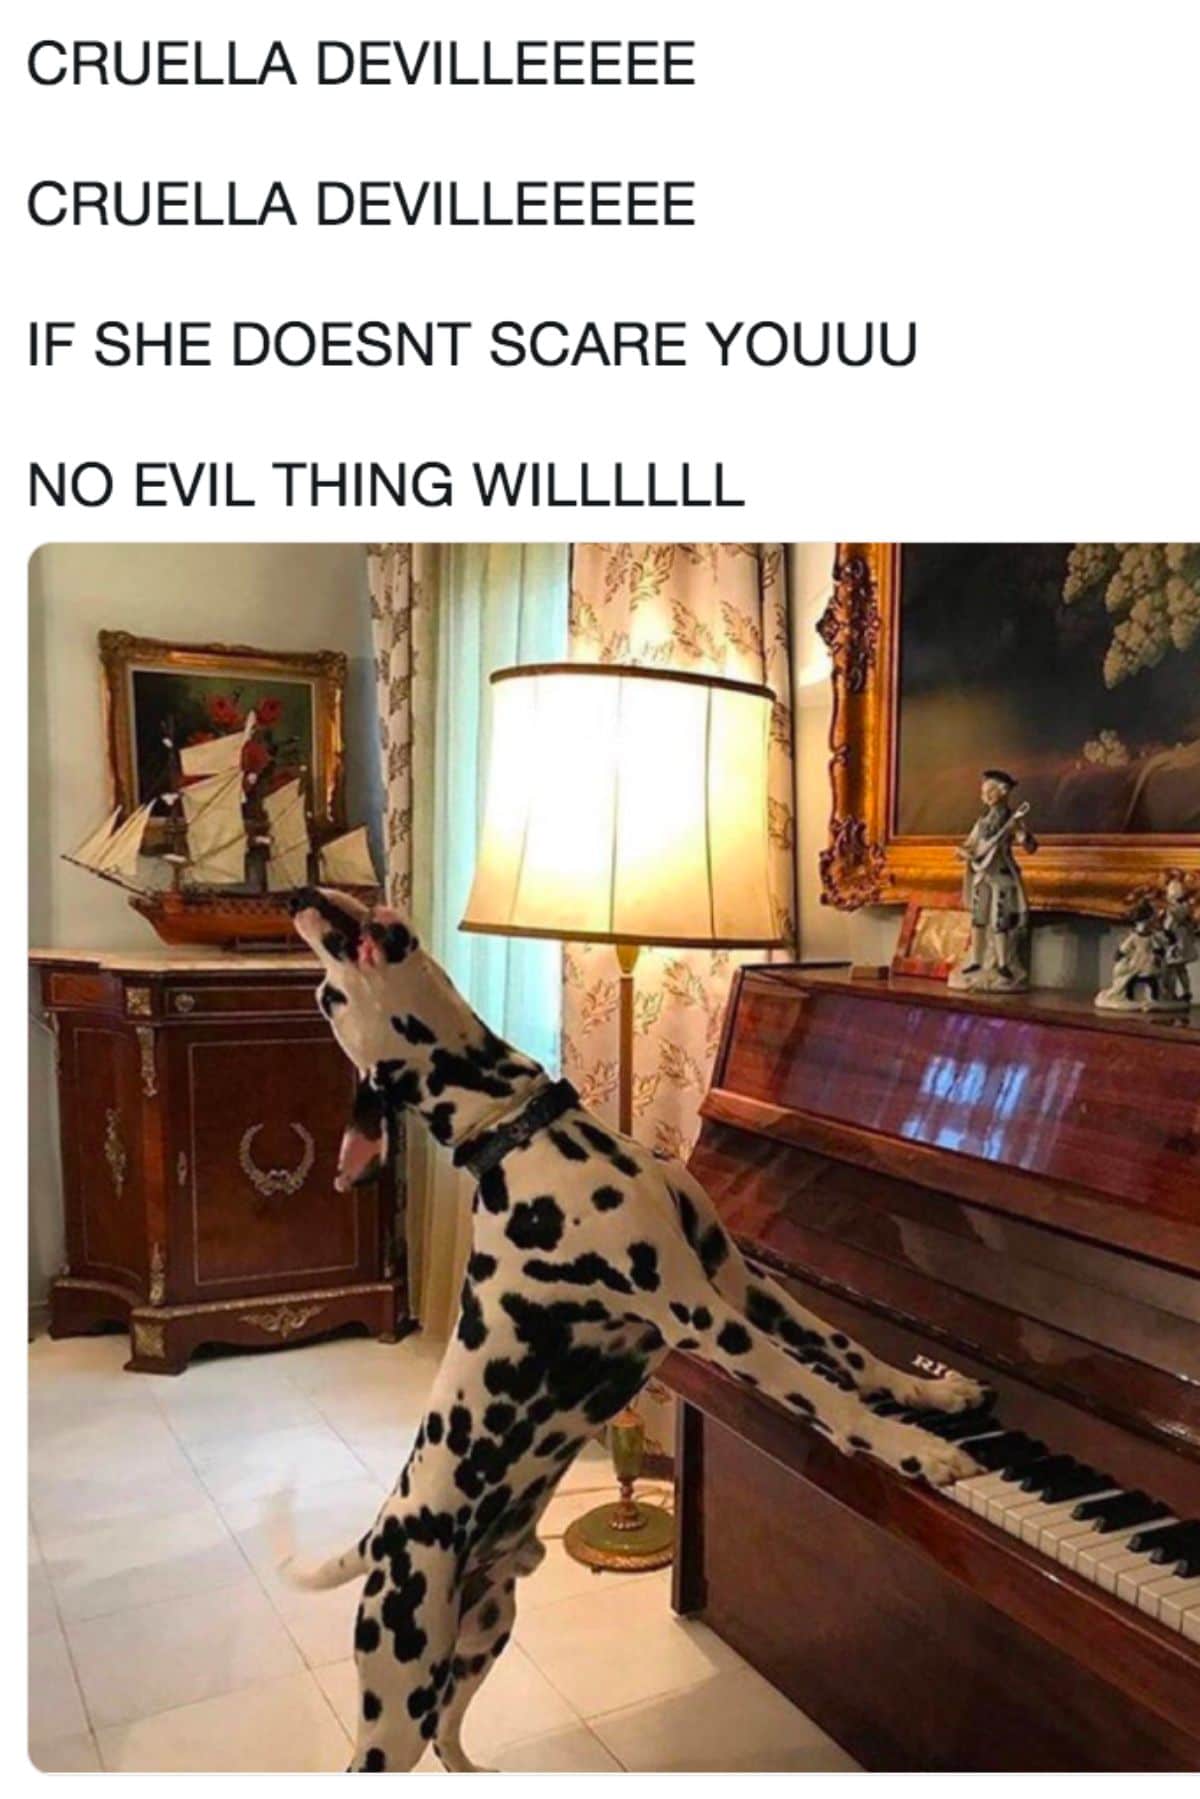 dalmation with front legs on the piano with caption saying cruella devilleeeee if she doesn't scare youuu no evil thing willlll